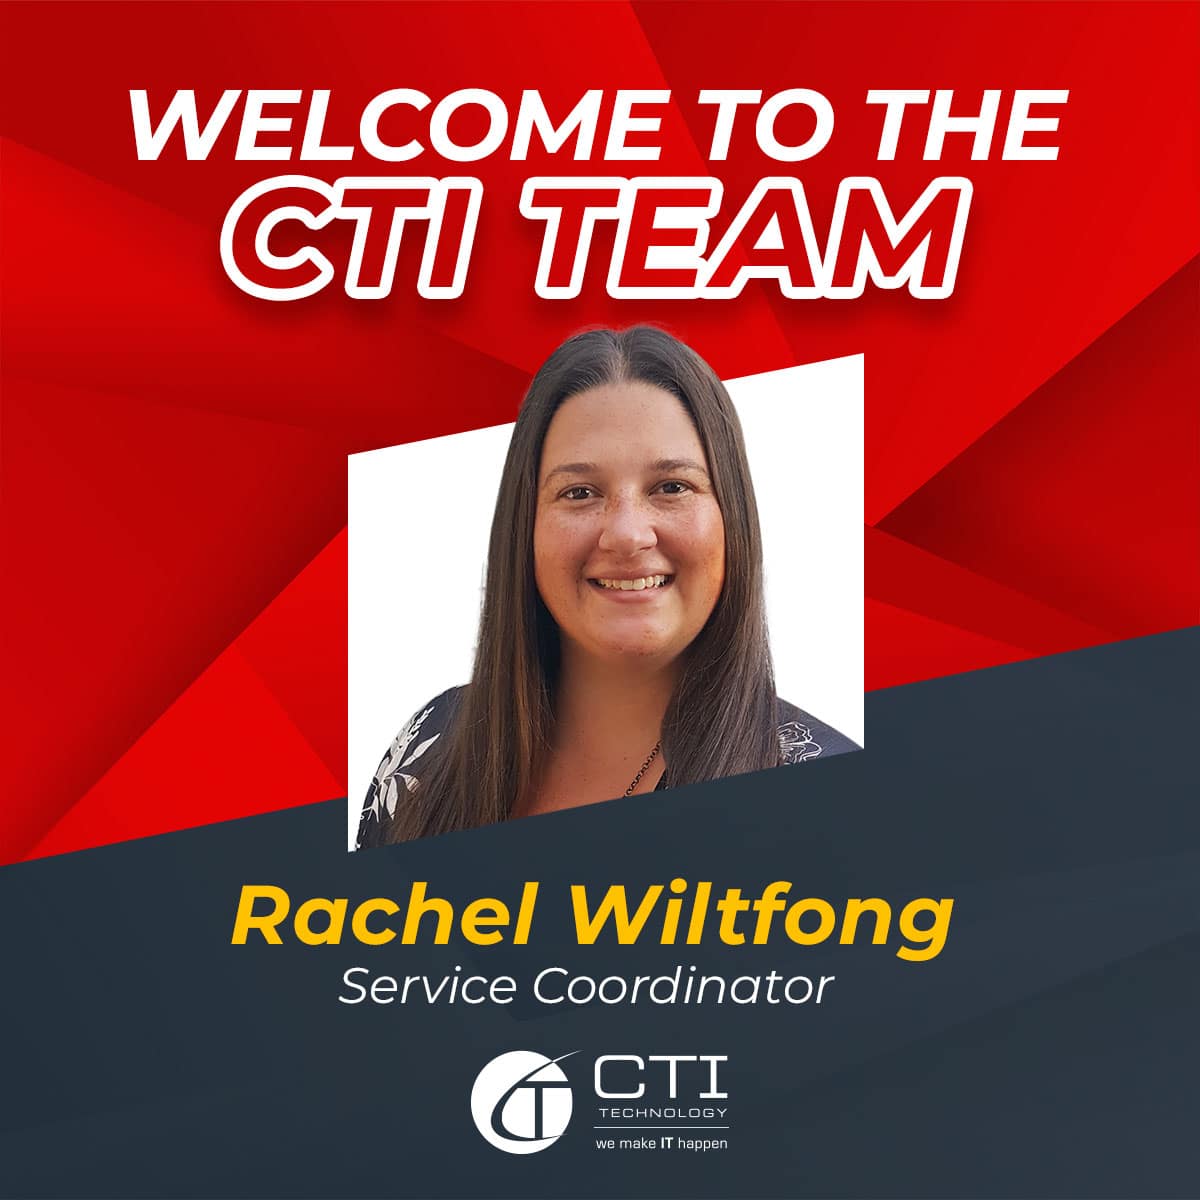 CTI Technology Welcomes Rachel Wiltfong To Our Team Of IT Experts!